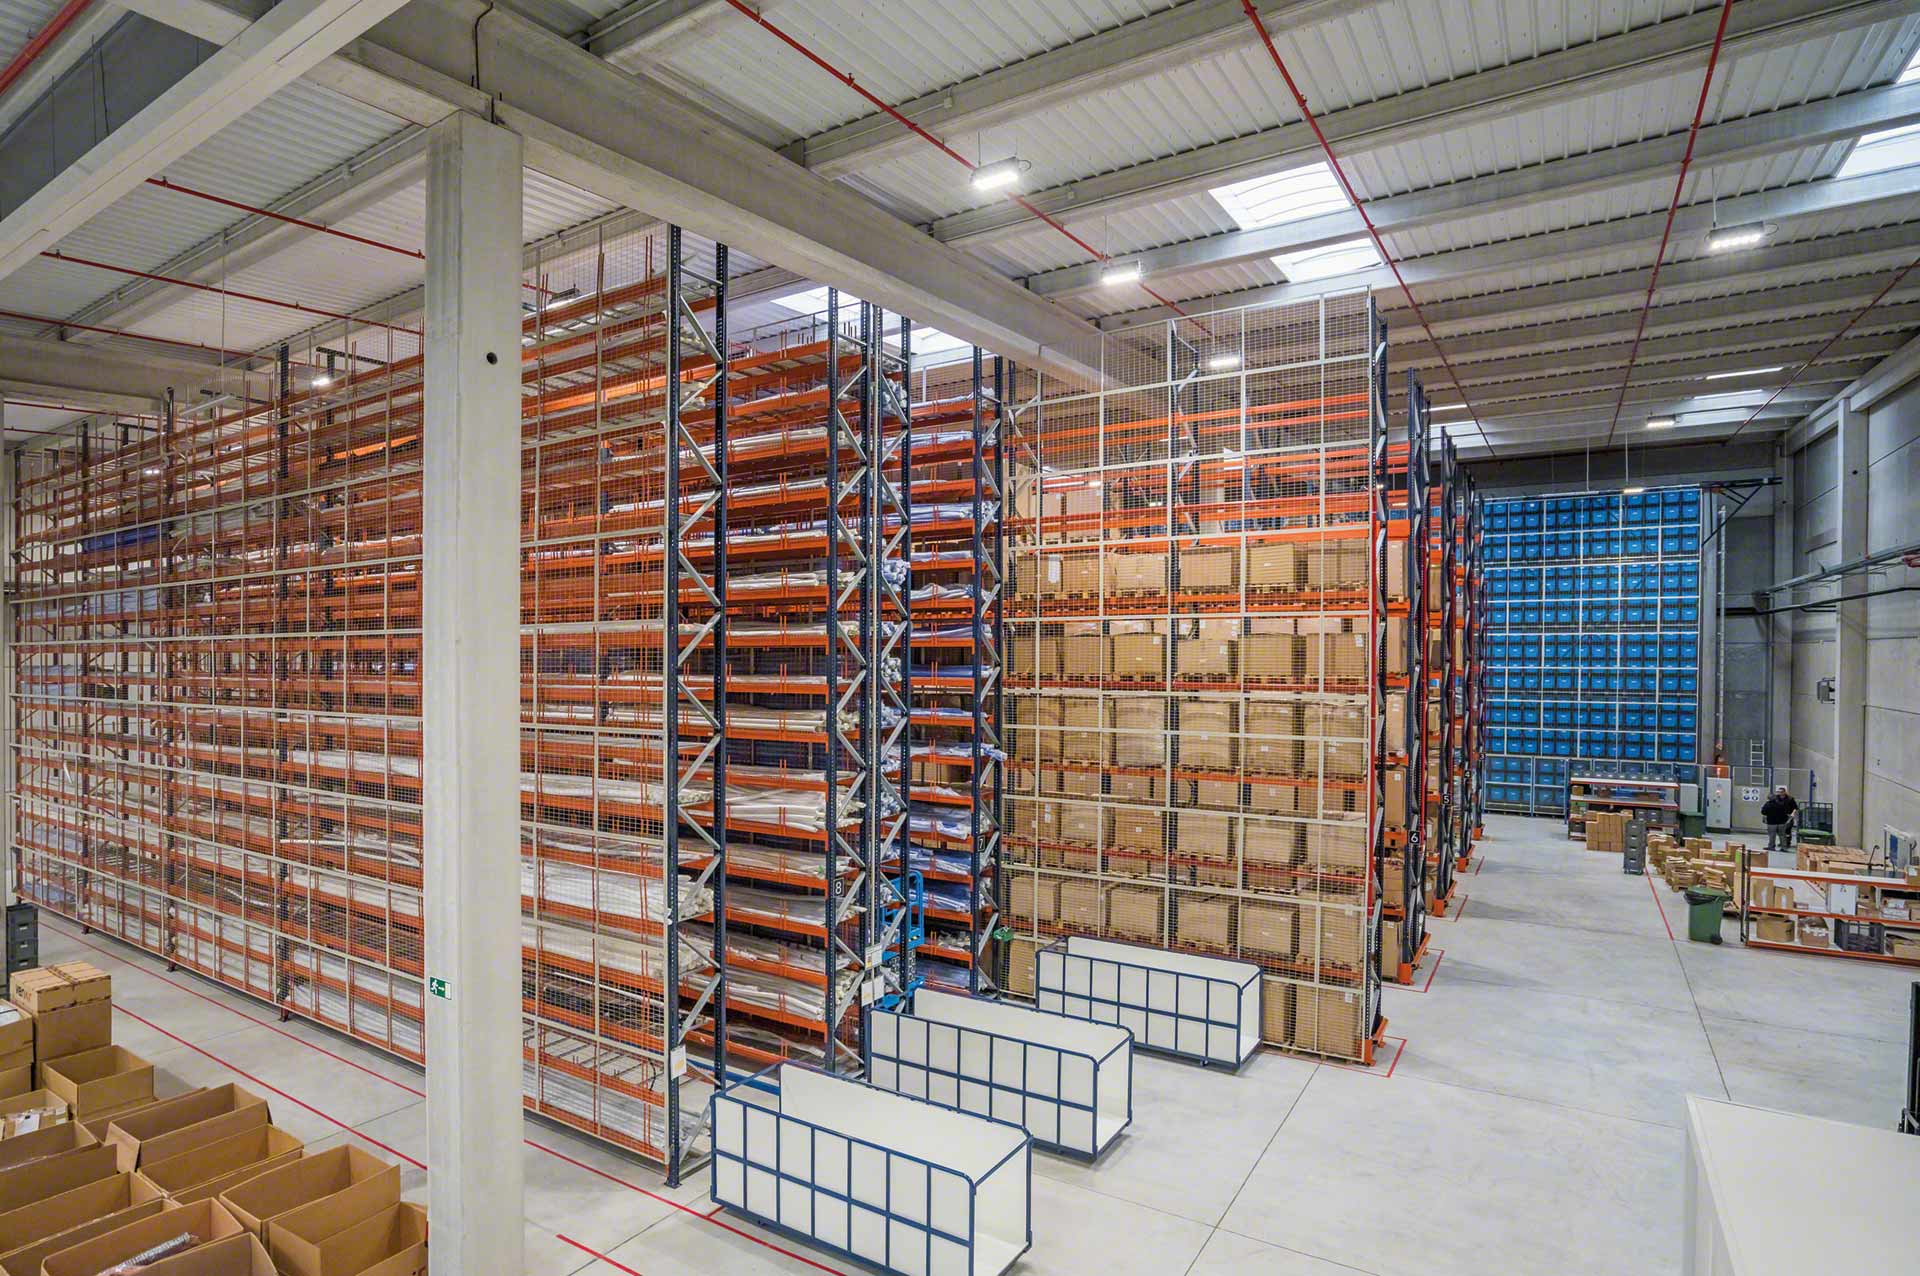 Pallet racks and an AS/RS for boxes (blue boxes) in the same facility